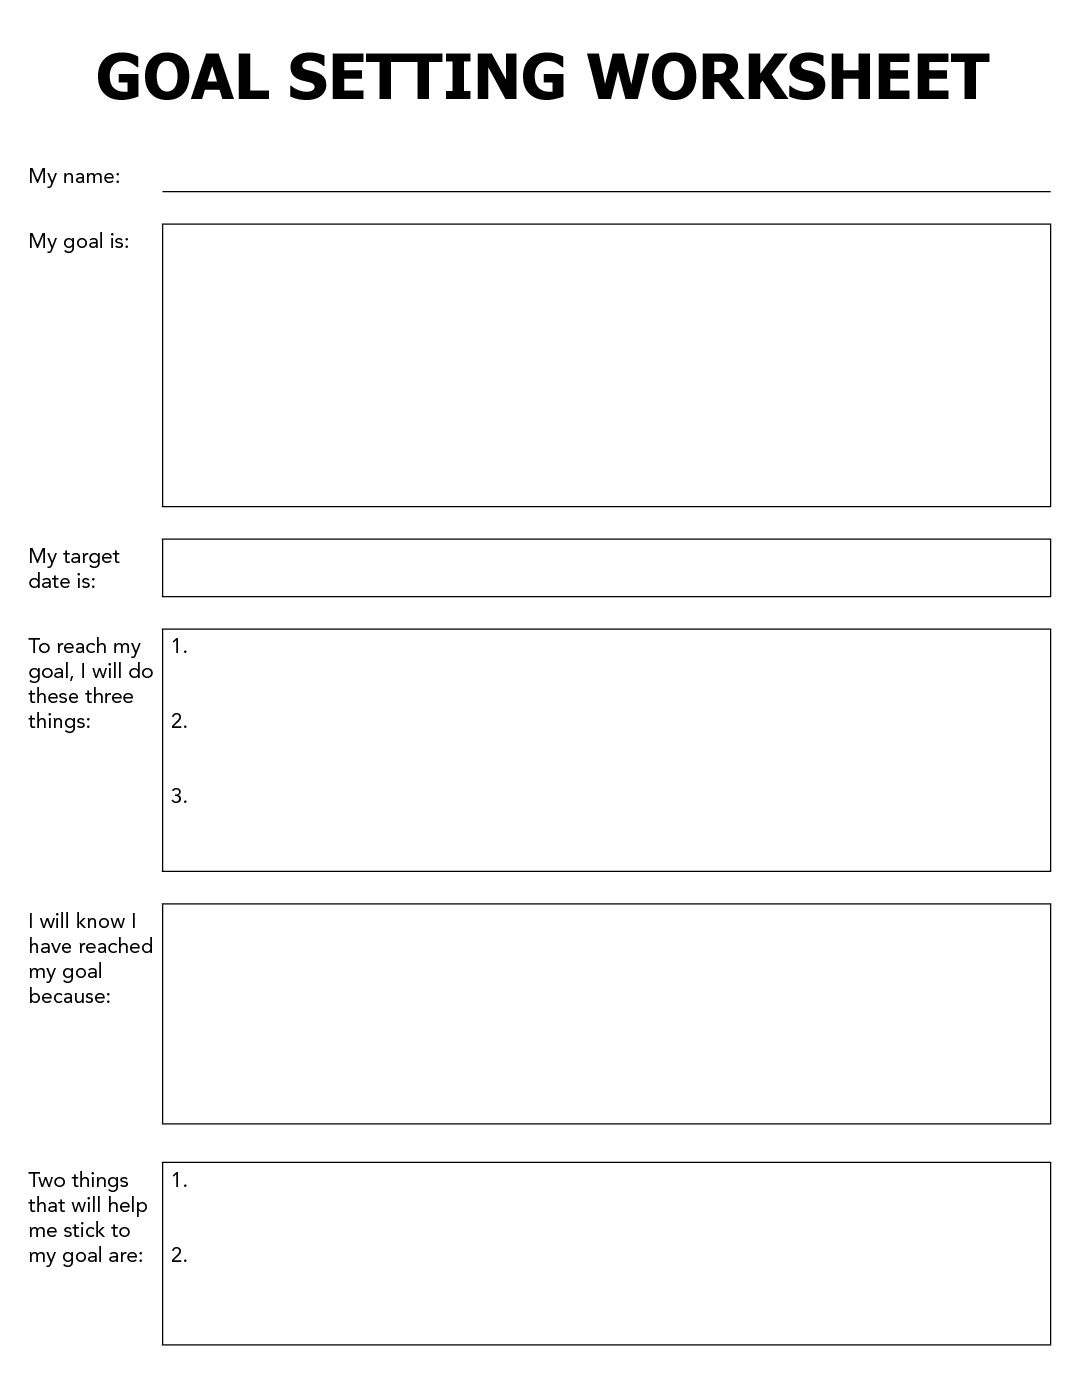 Stress Management In Goal Setting Worksheet For High School Students Pdf